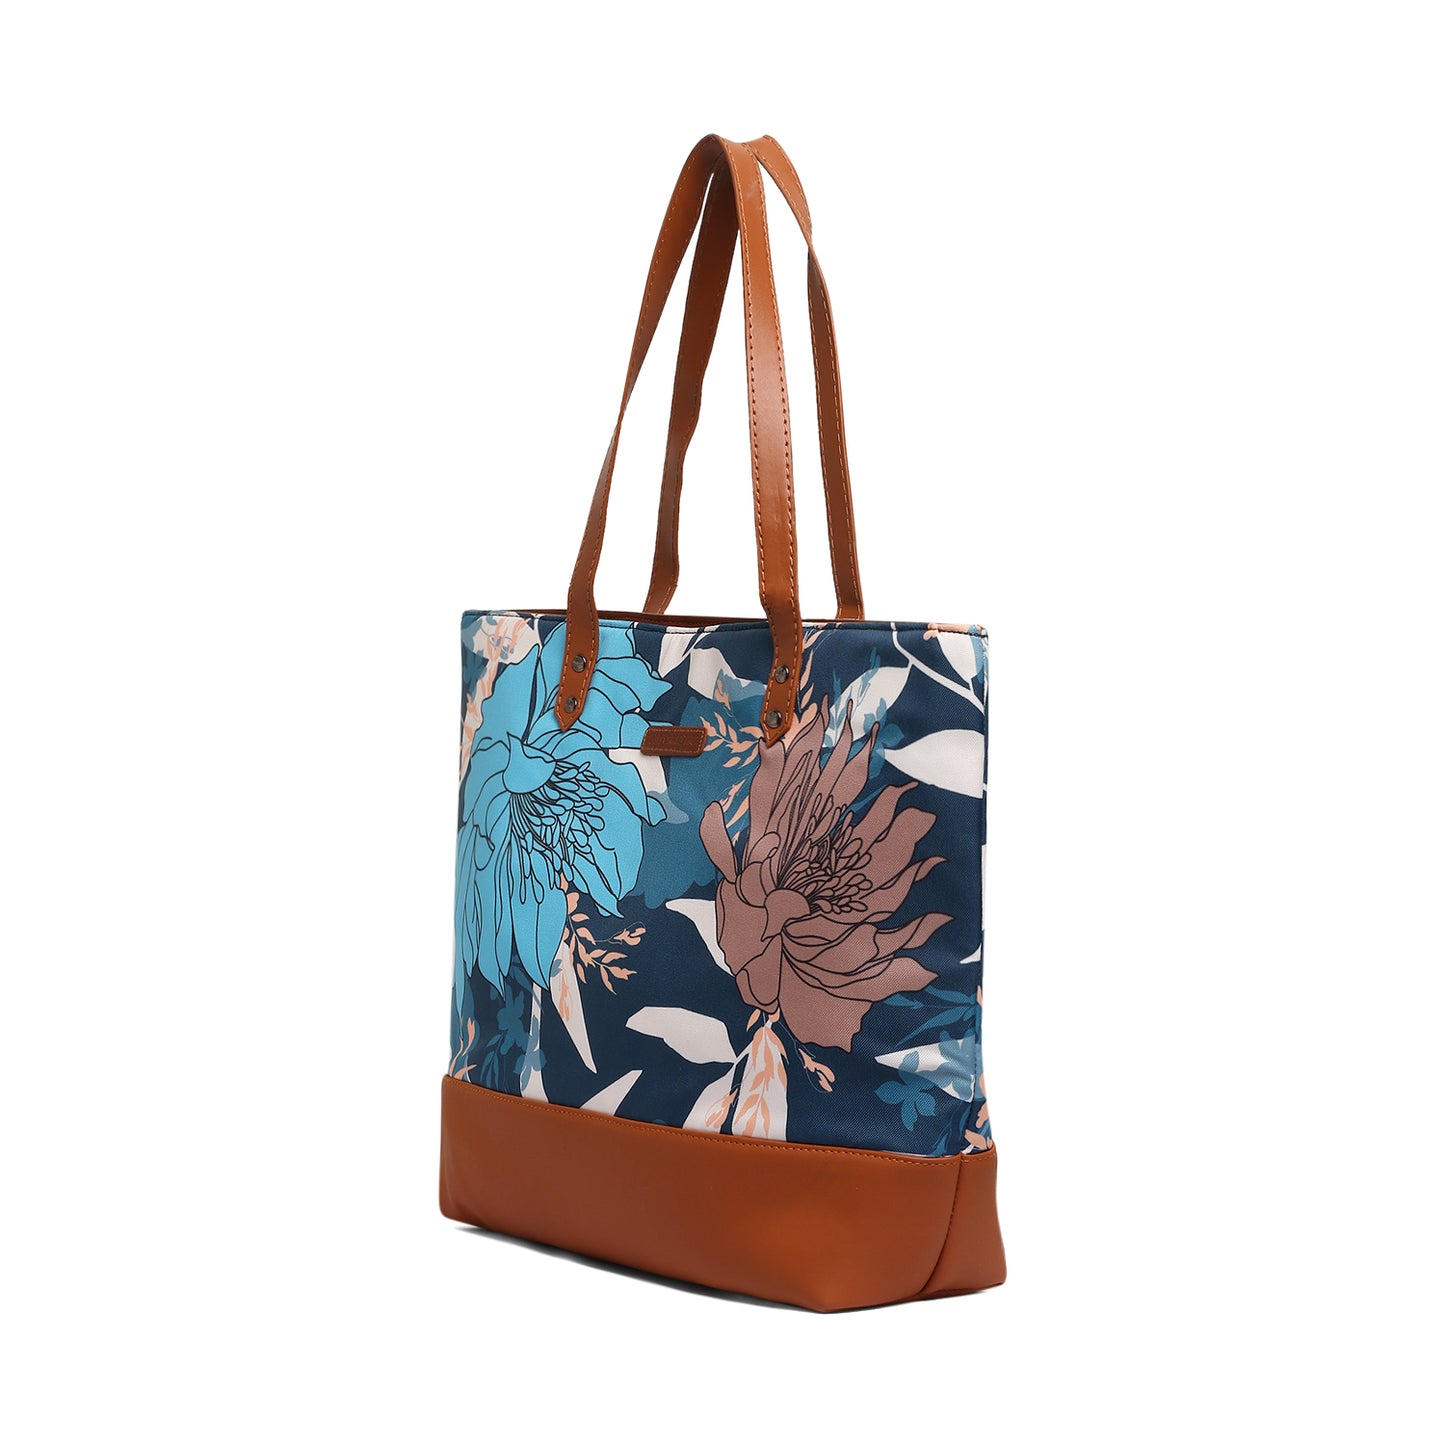 Enchanting Leather Tote Bag For Women